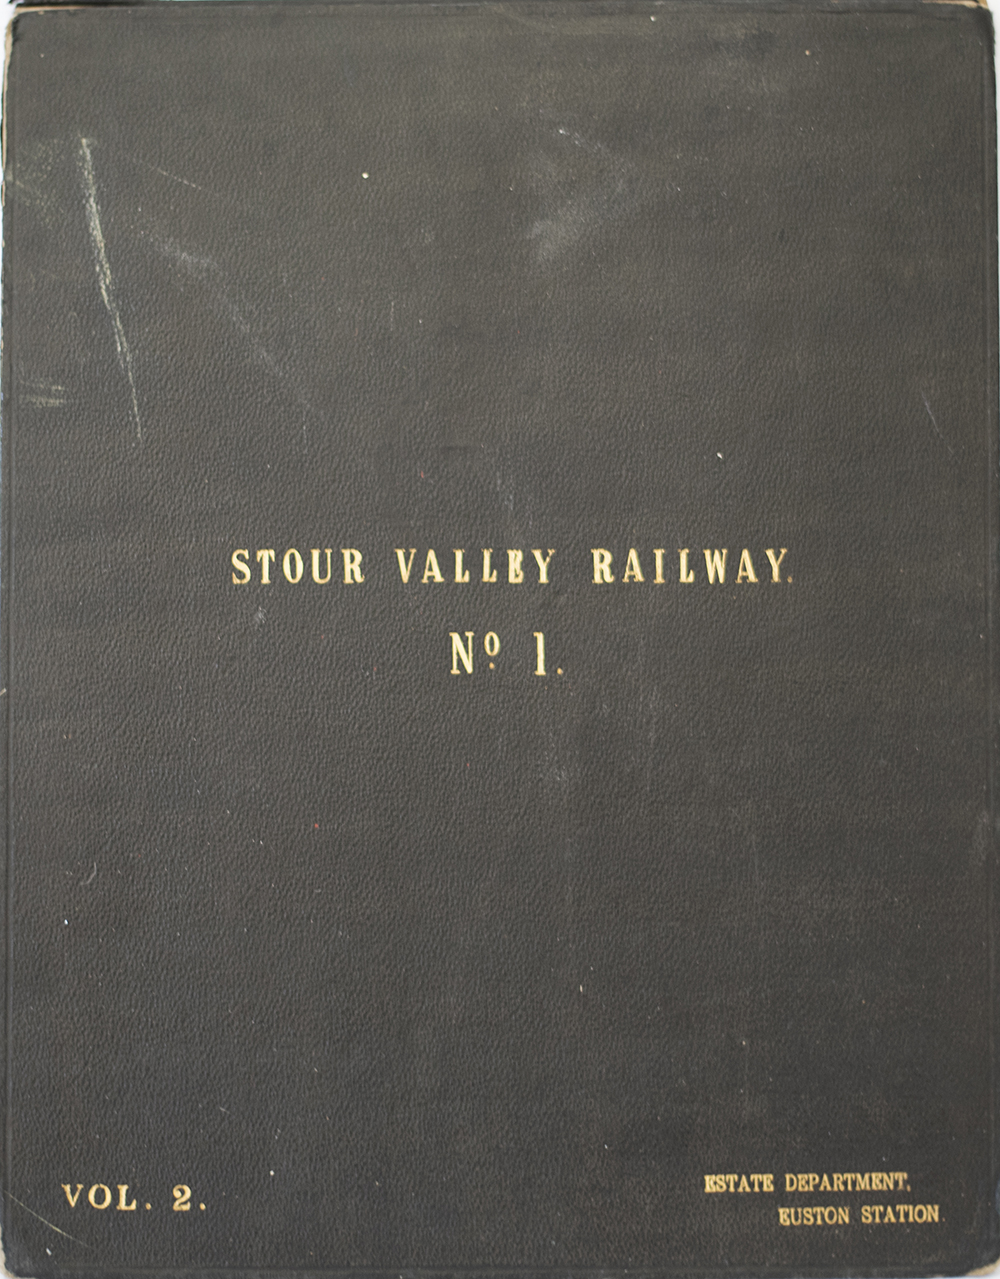 London & North Western Railway original hand coloured plans of the Stour Valley Railway No1 Vol 2.